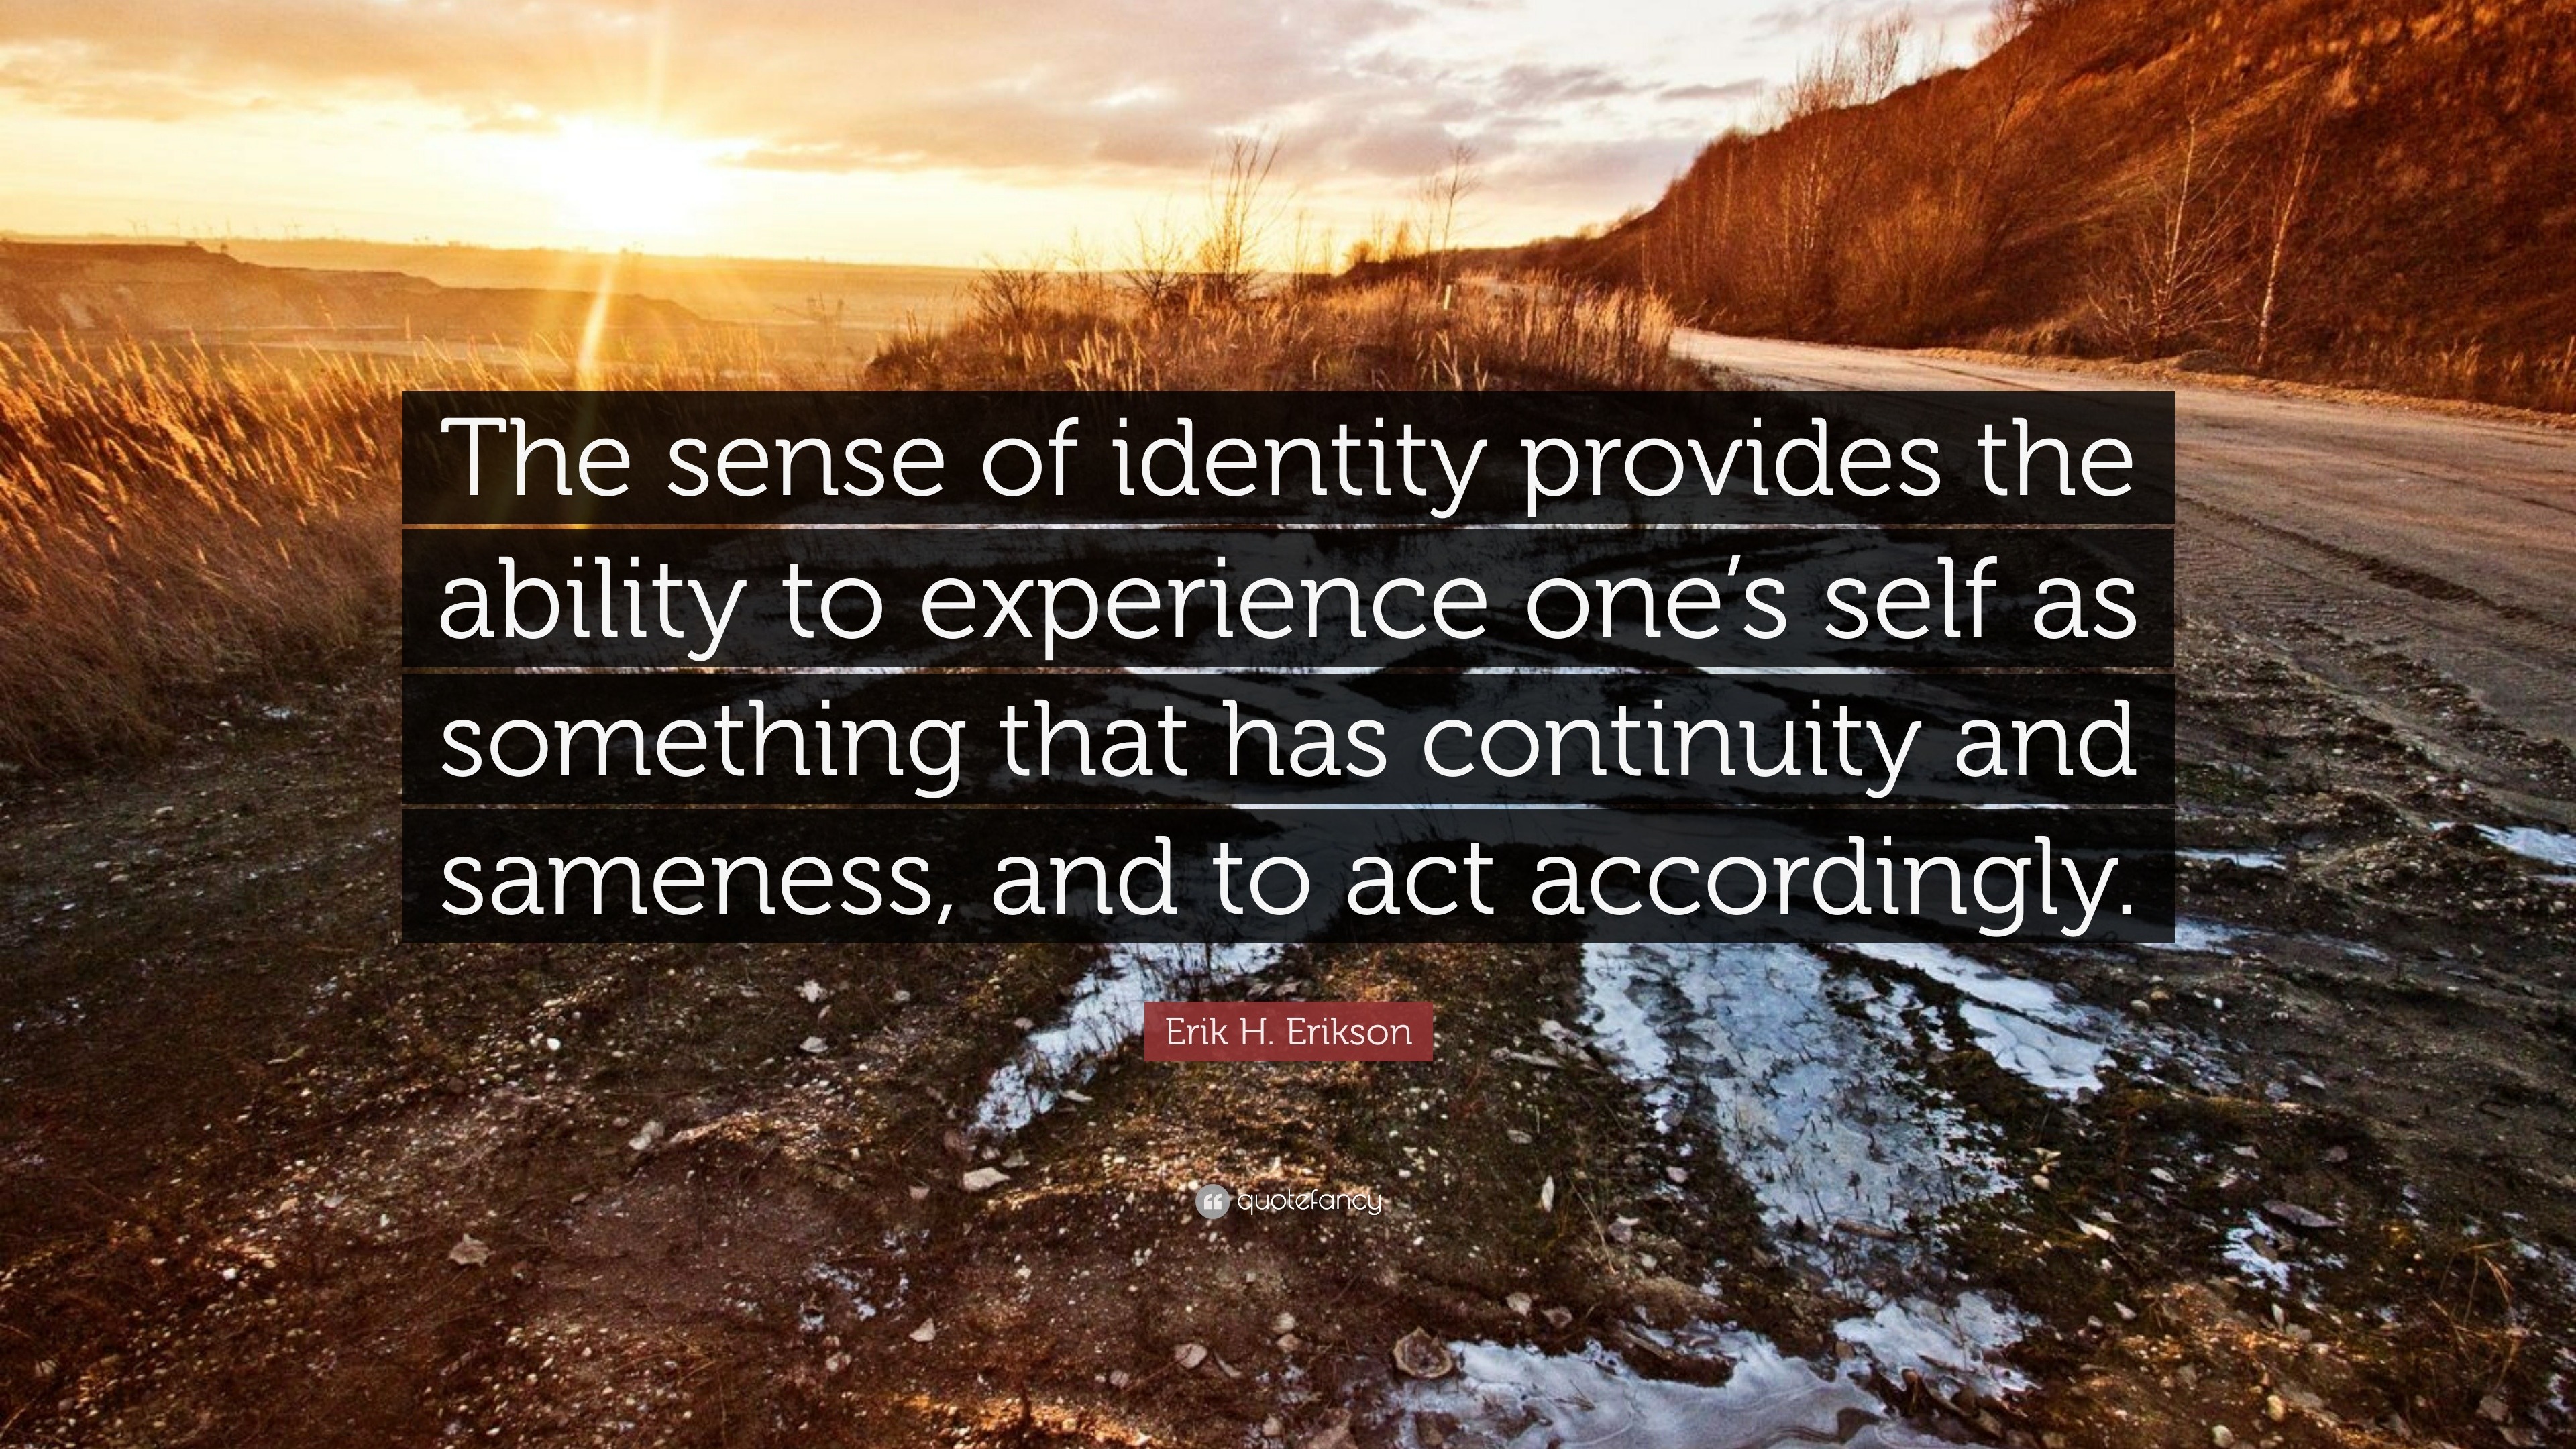 Erik H Erikson Quote “the Sense Of Identity Provides The Ability To Experience Ones Self As 